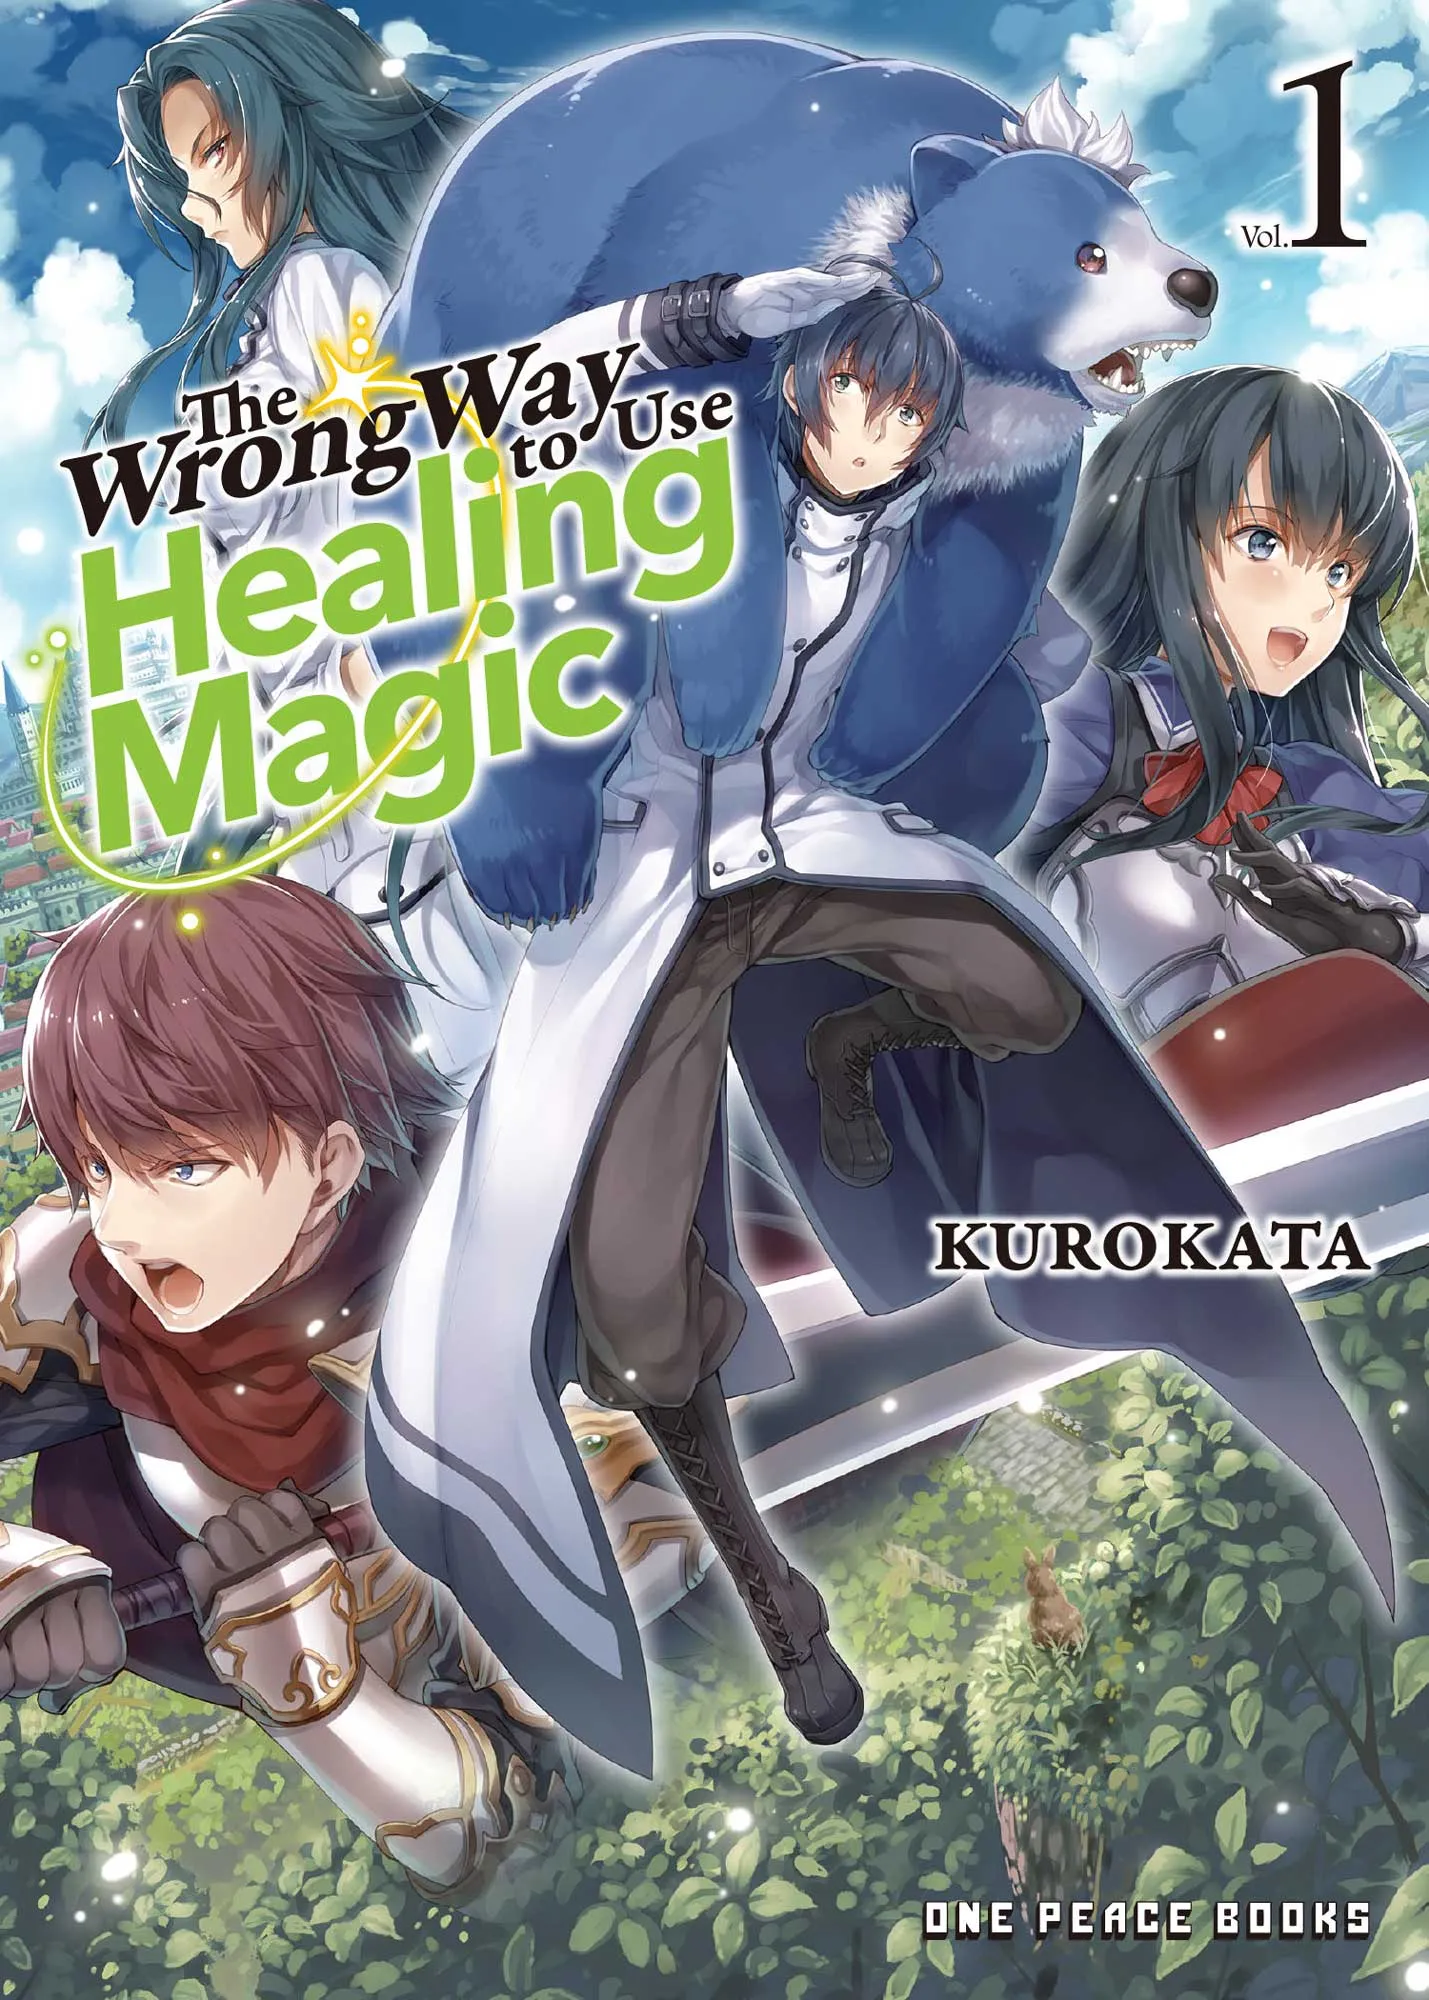 The Wrong Way to Use Healing Magic Volume 1 (The Wrong Way to Use Healing Magic #1)